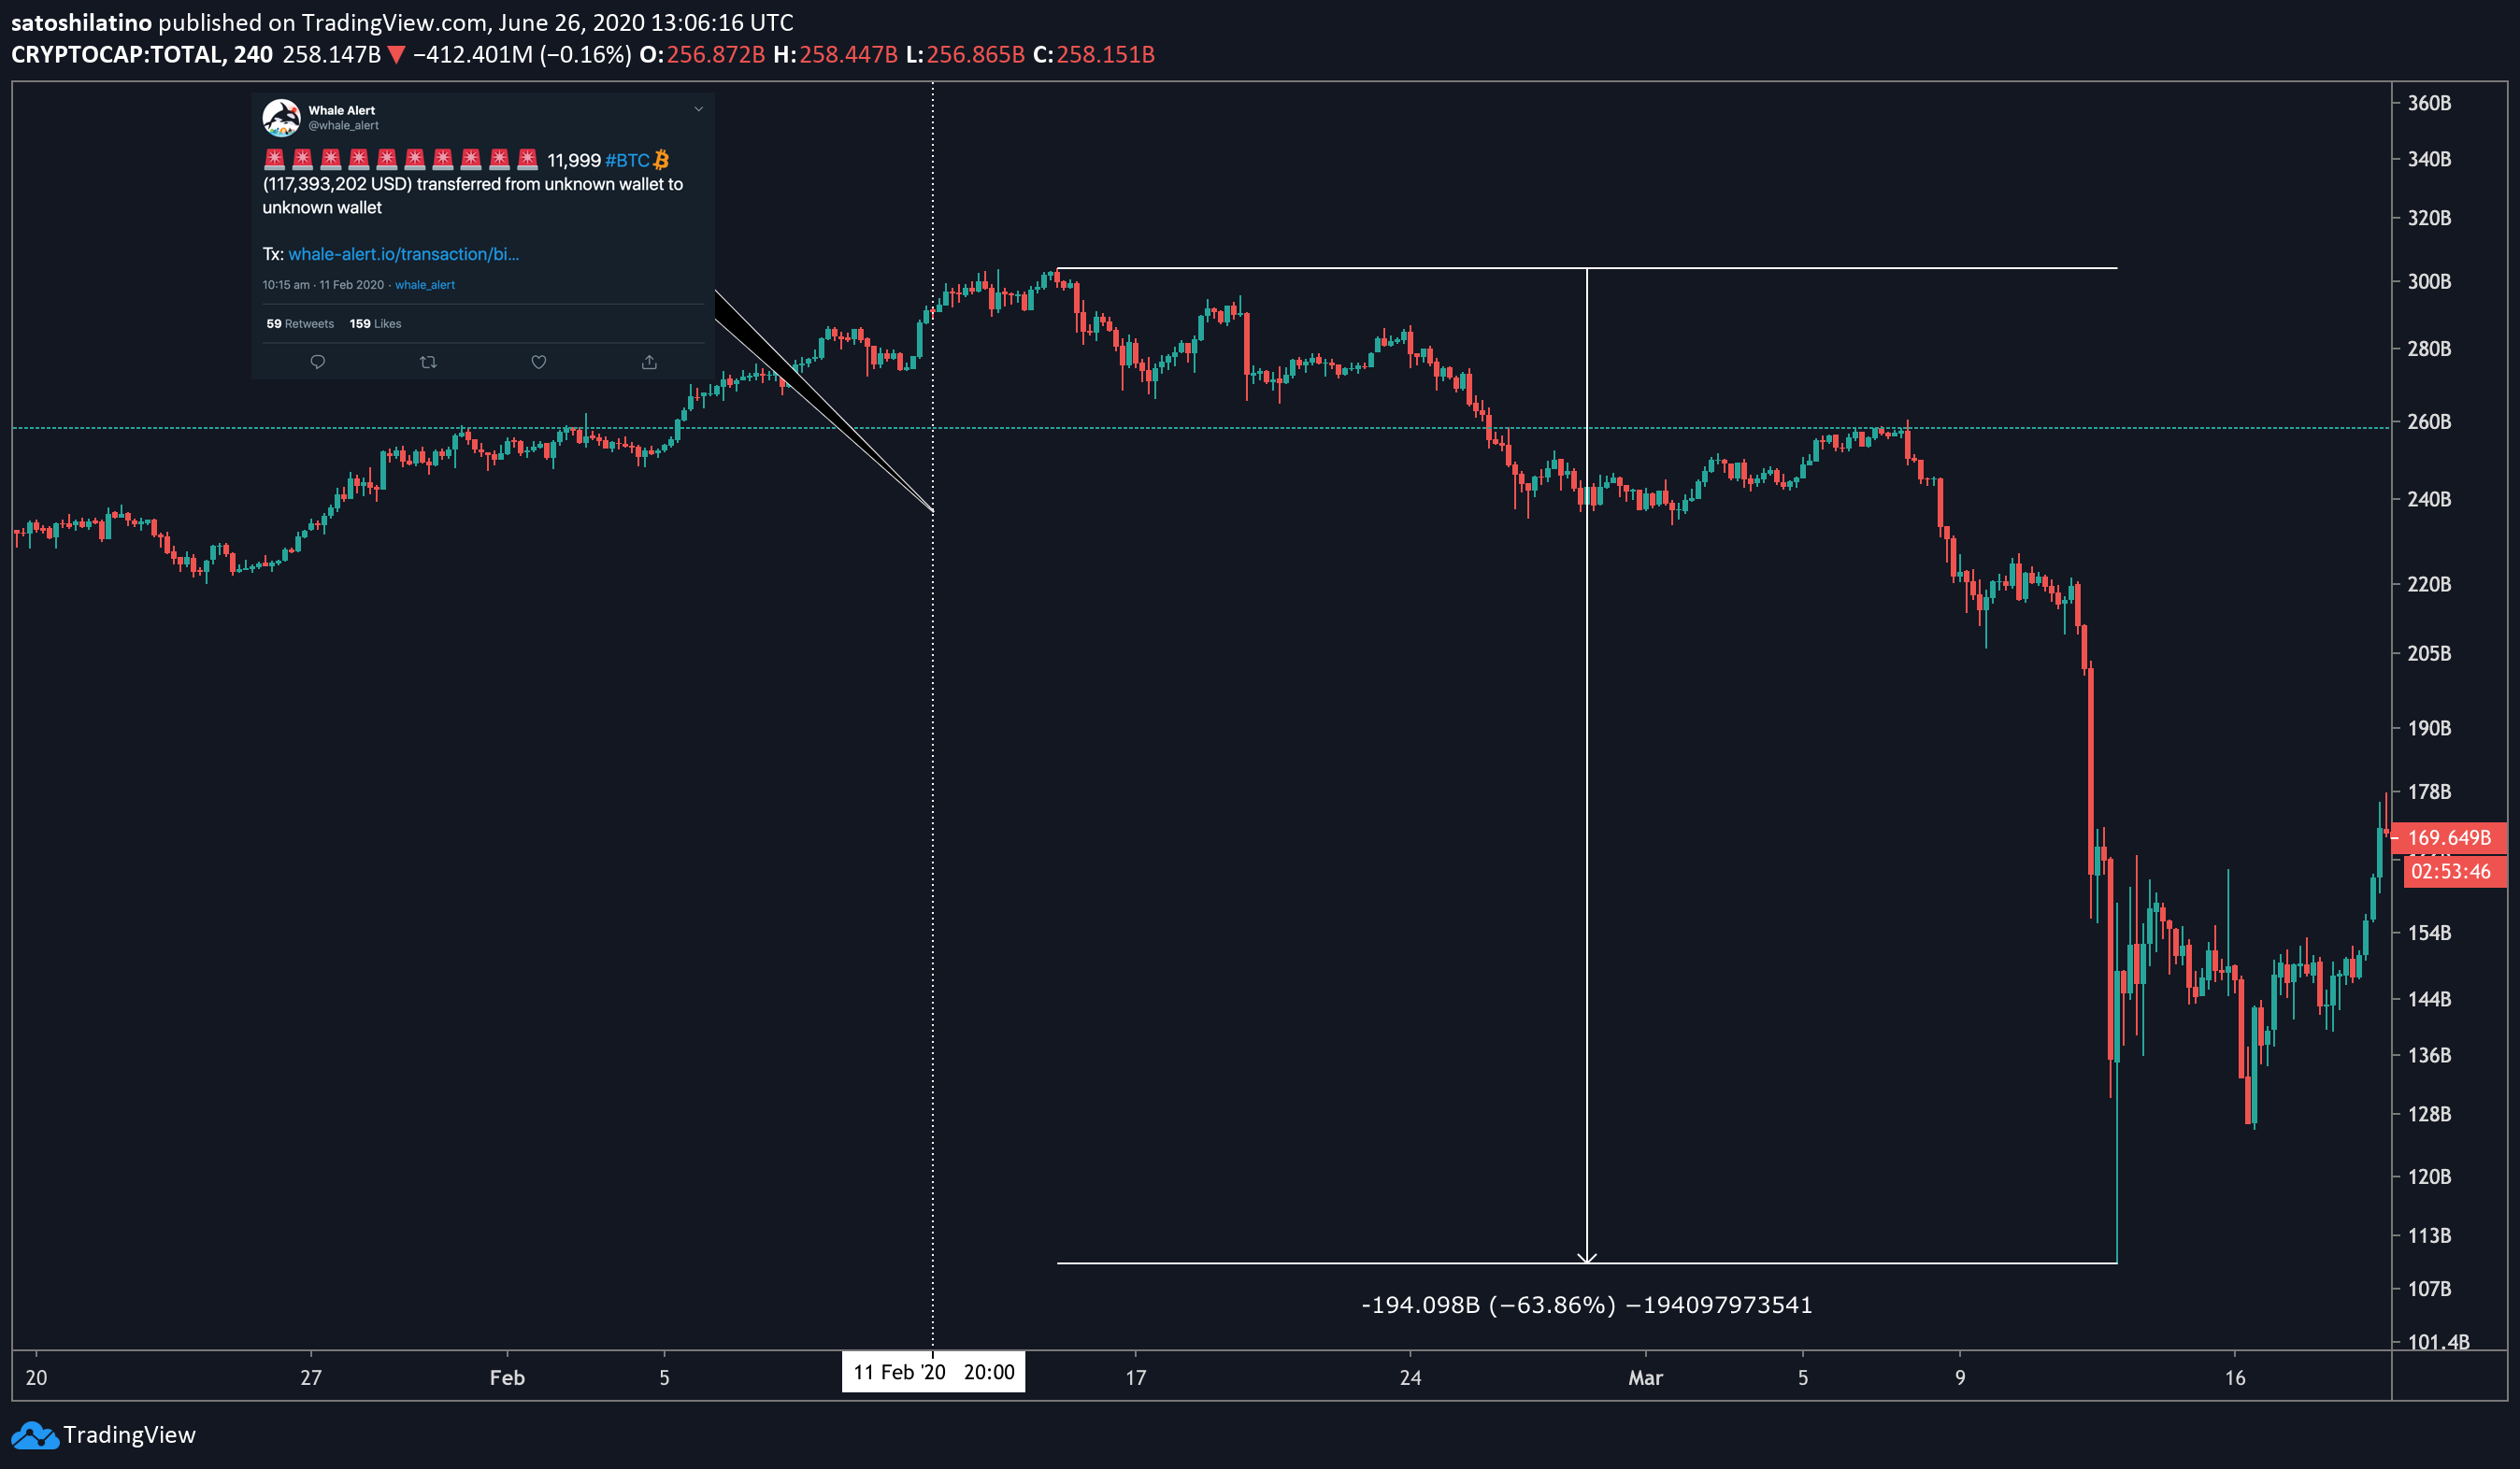 Total Cryptocurrency Market Capitalization on TradingView